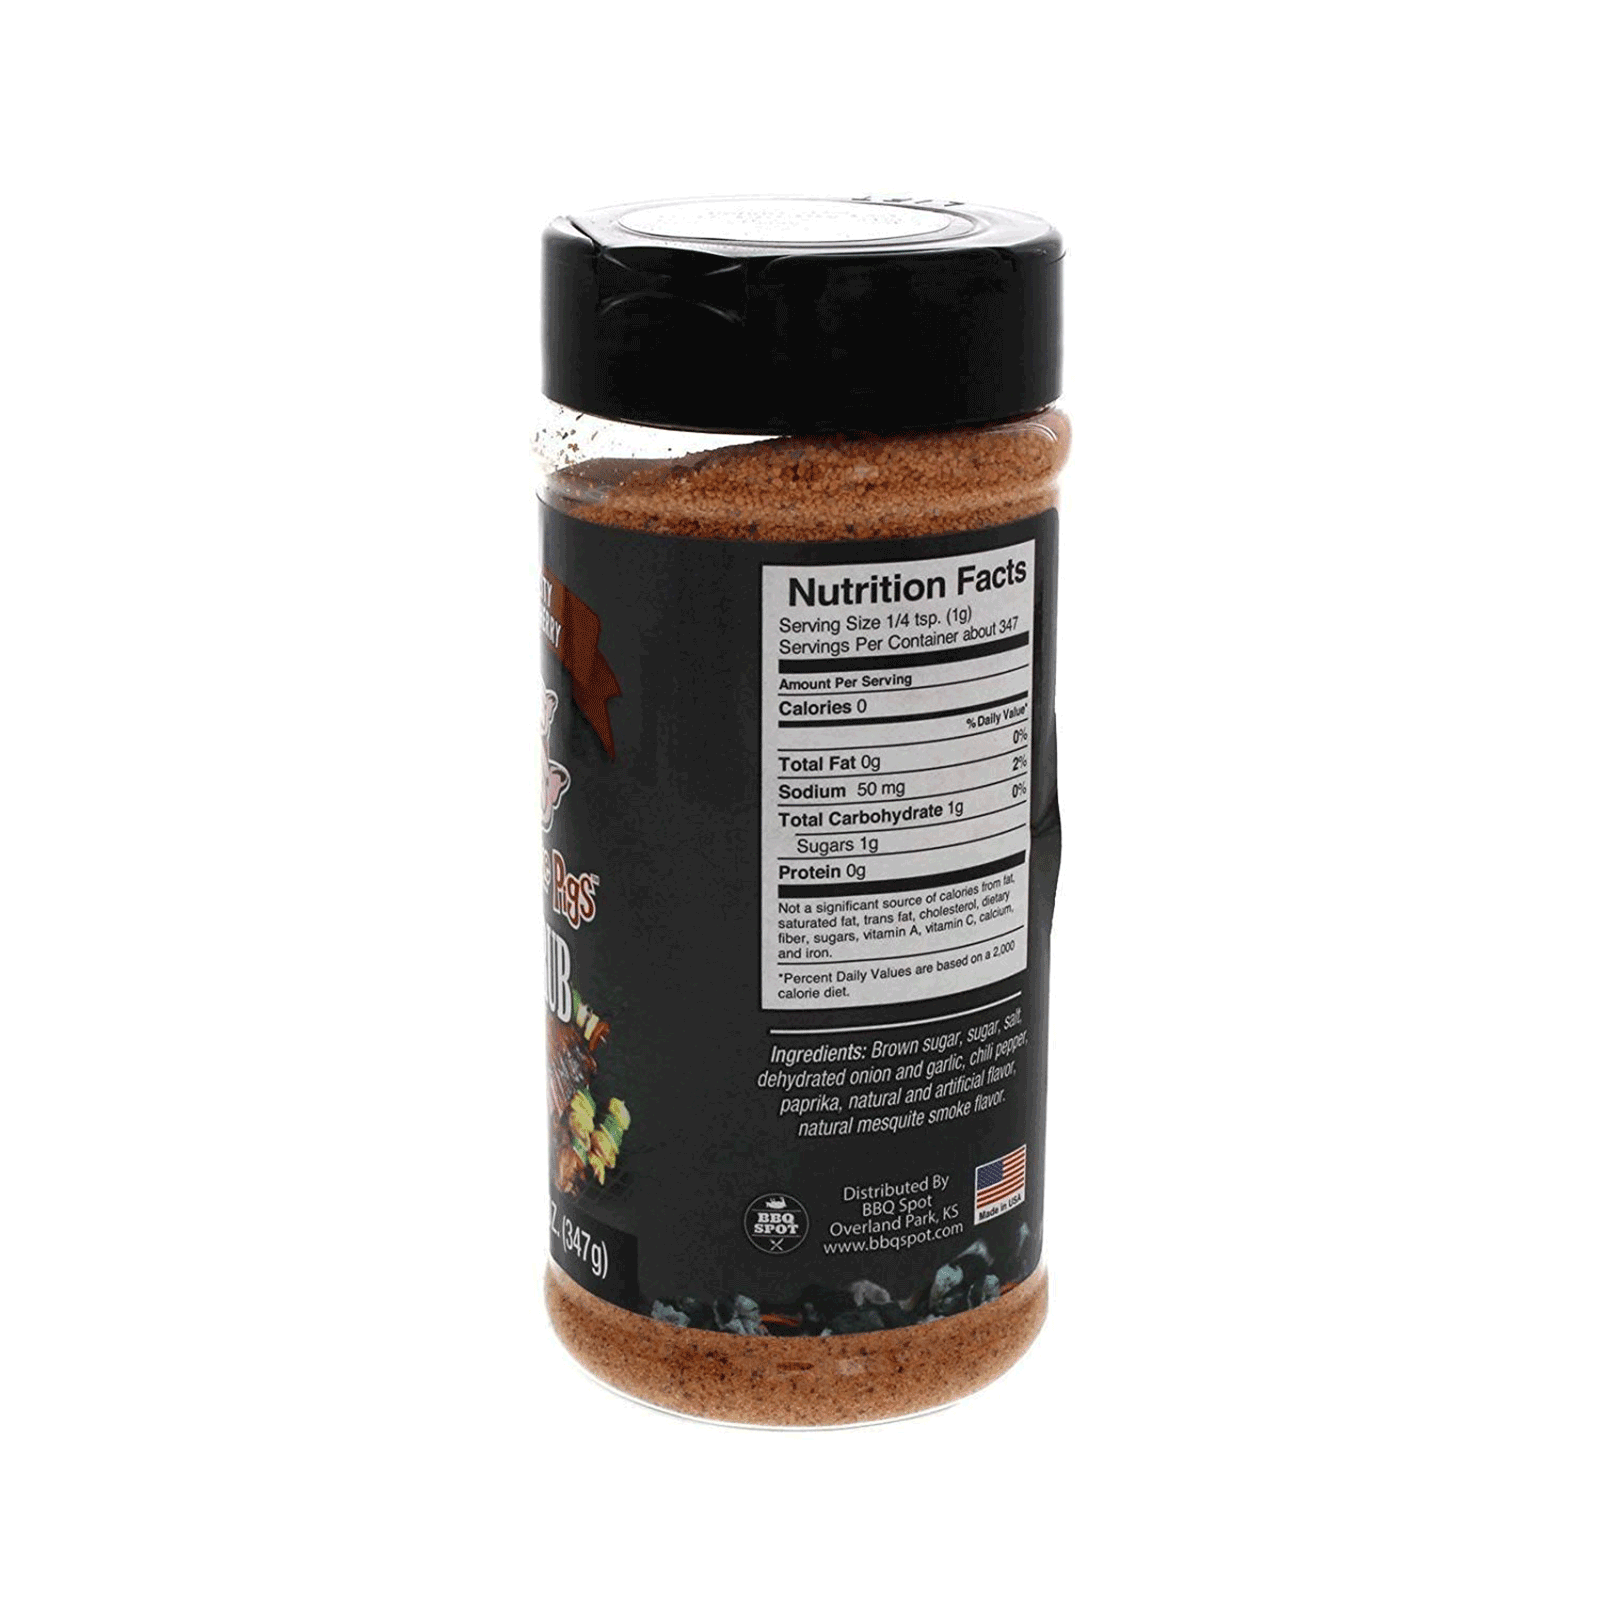 'Three Little Pigs' Touch of Cherry BBQ Rub  12.25oz Shaker Jar - Made in USA - OW85131